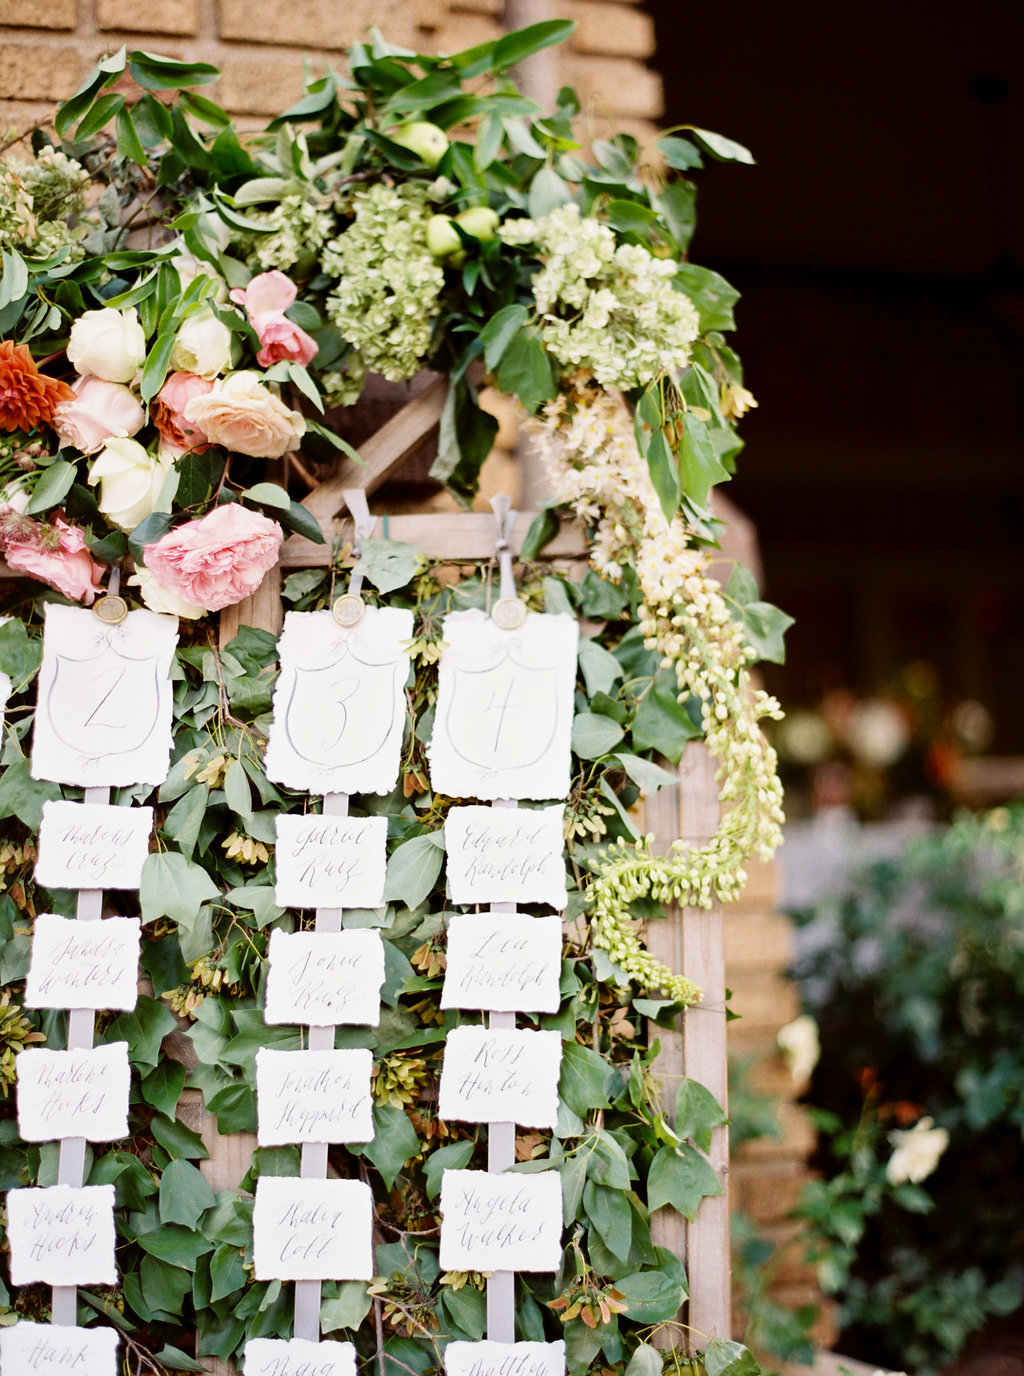 Escort Cards on Greenery Bed